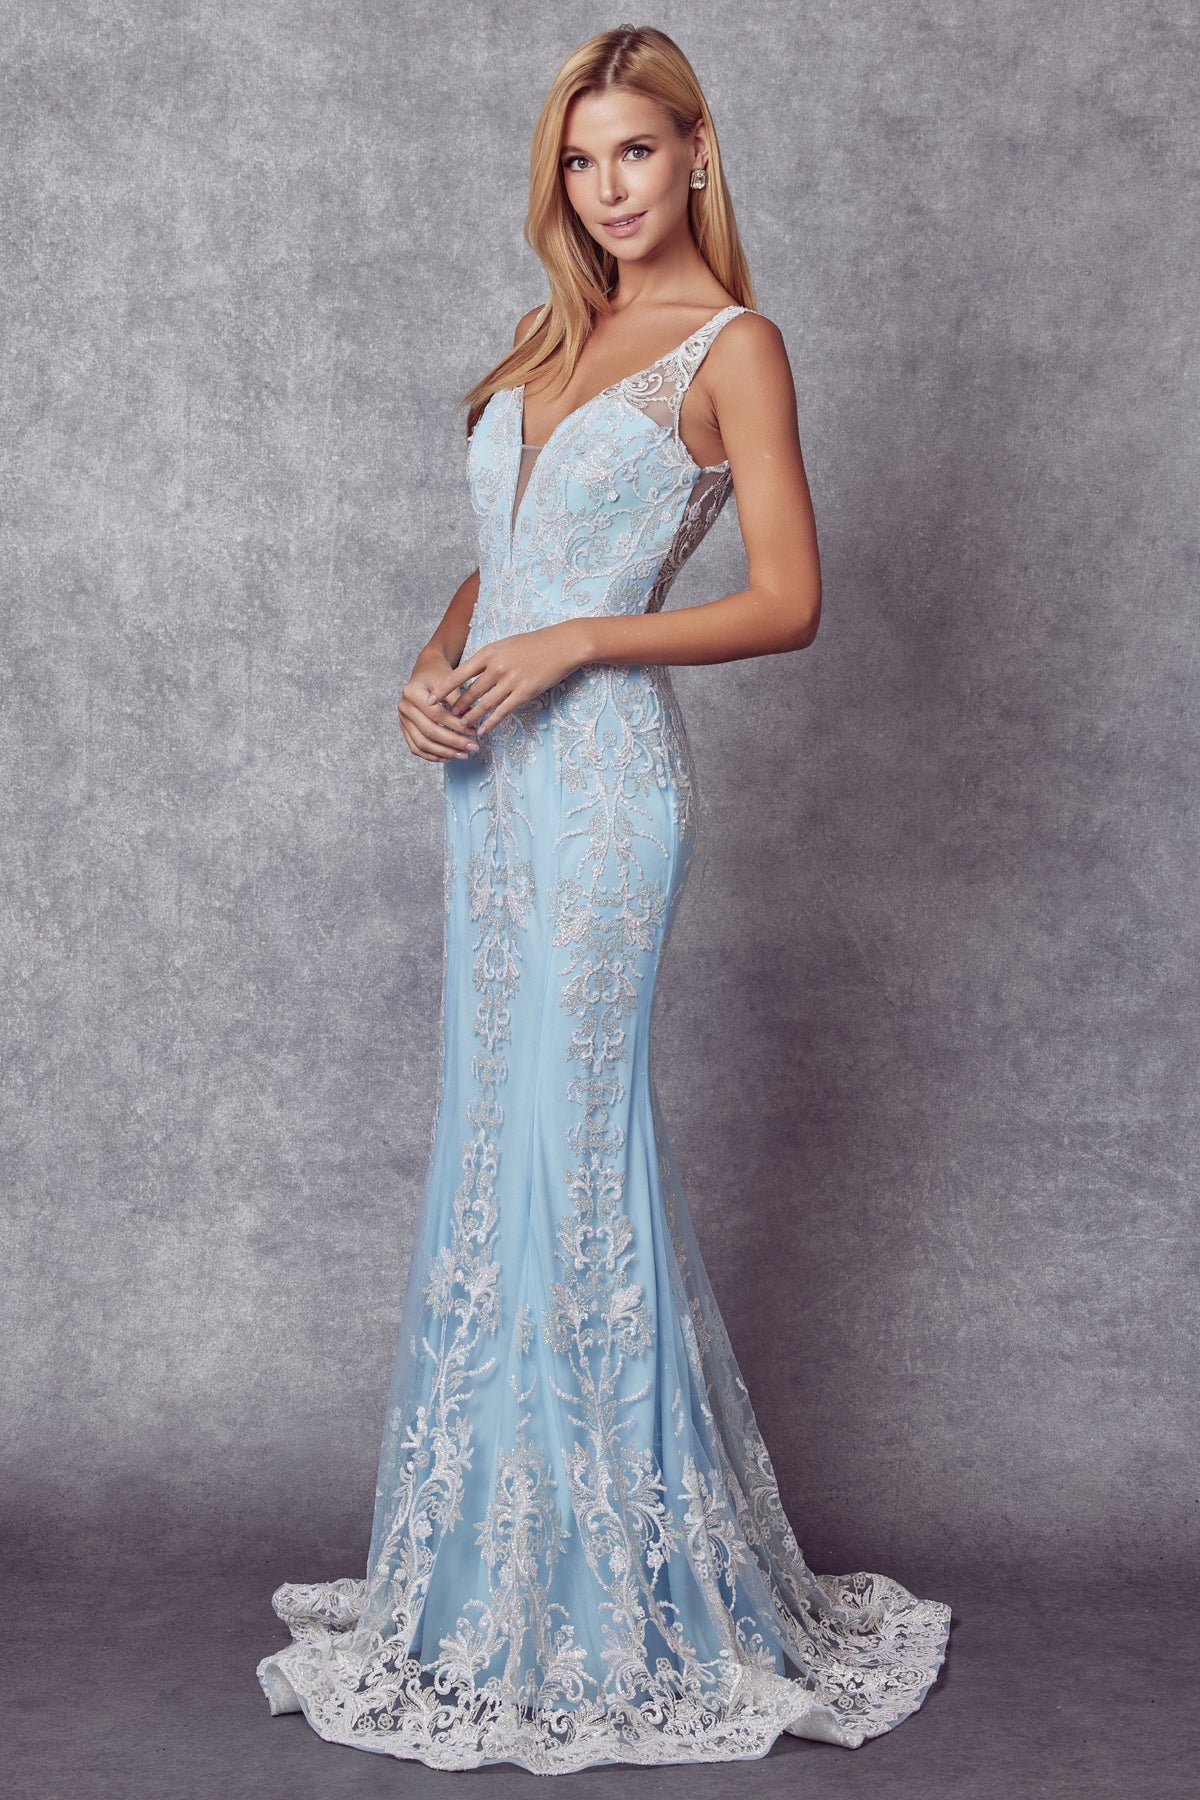 Embellished Glitter Embroidered Lace Long Wedding & Prom Dress JT277 Elsy Style Prom Dress